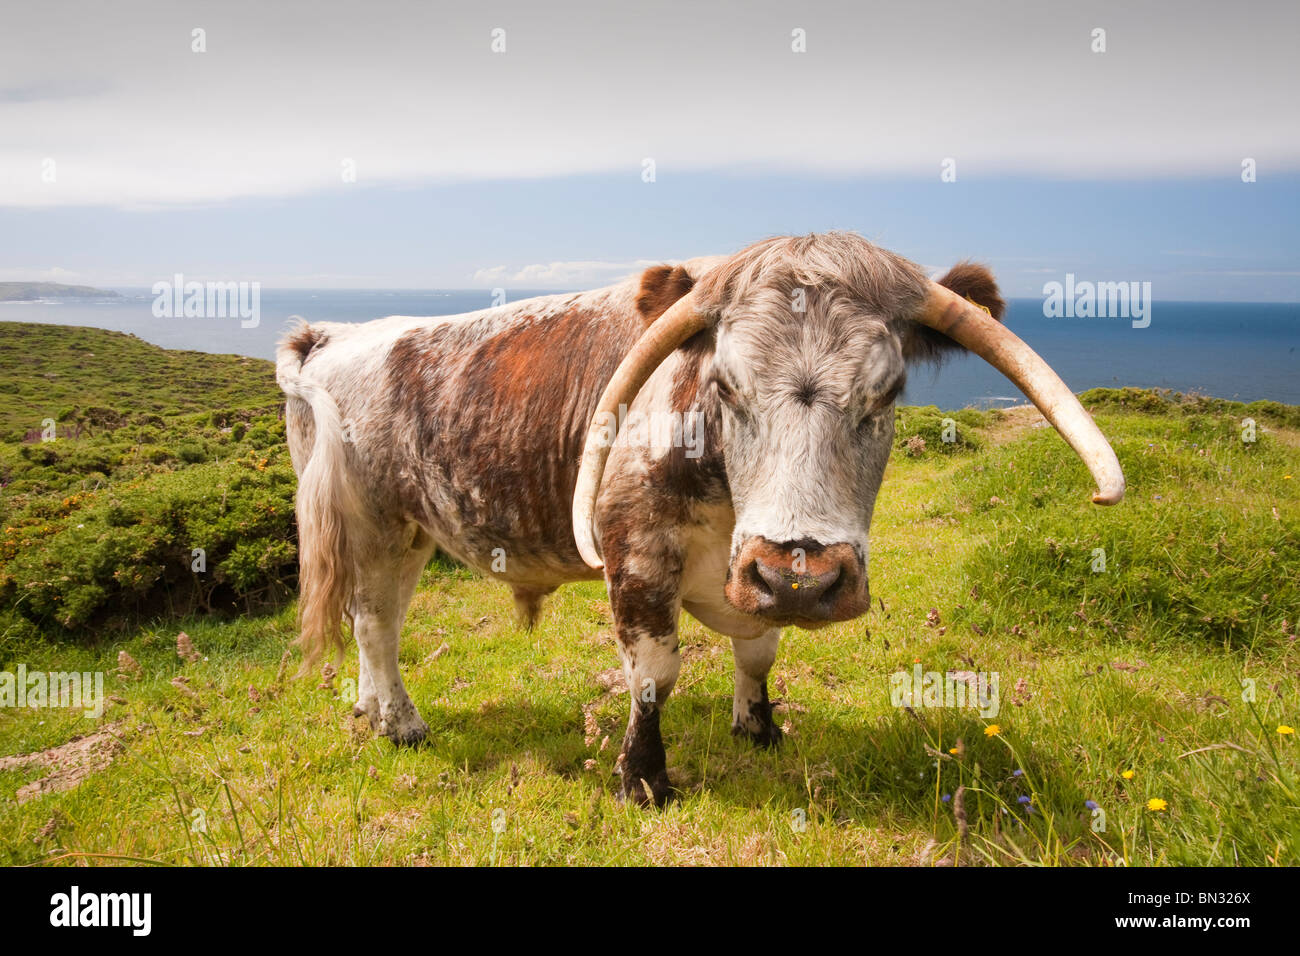 English long Horn cattle being used for conservation grazing to improve the habitat on the Cornish coast near Sennen, Cornwall. Stock Photo